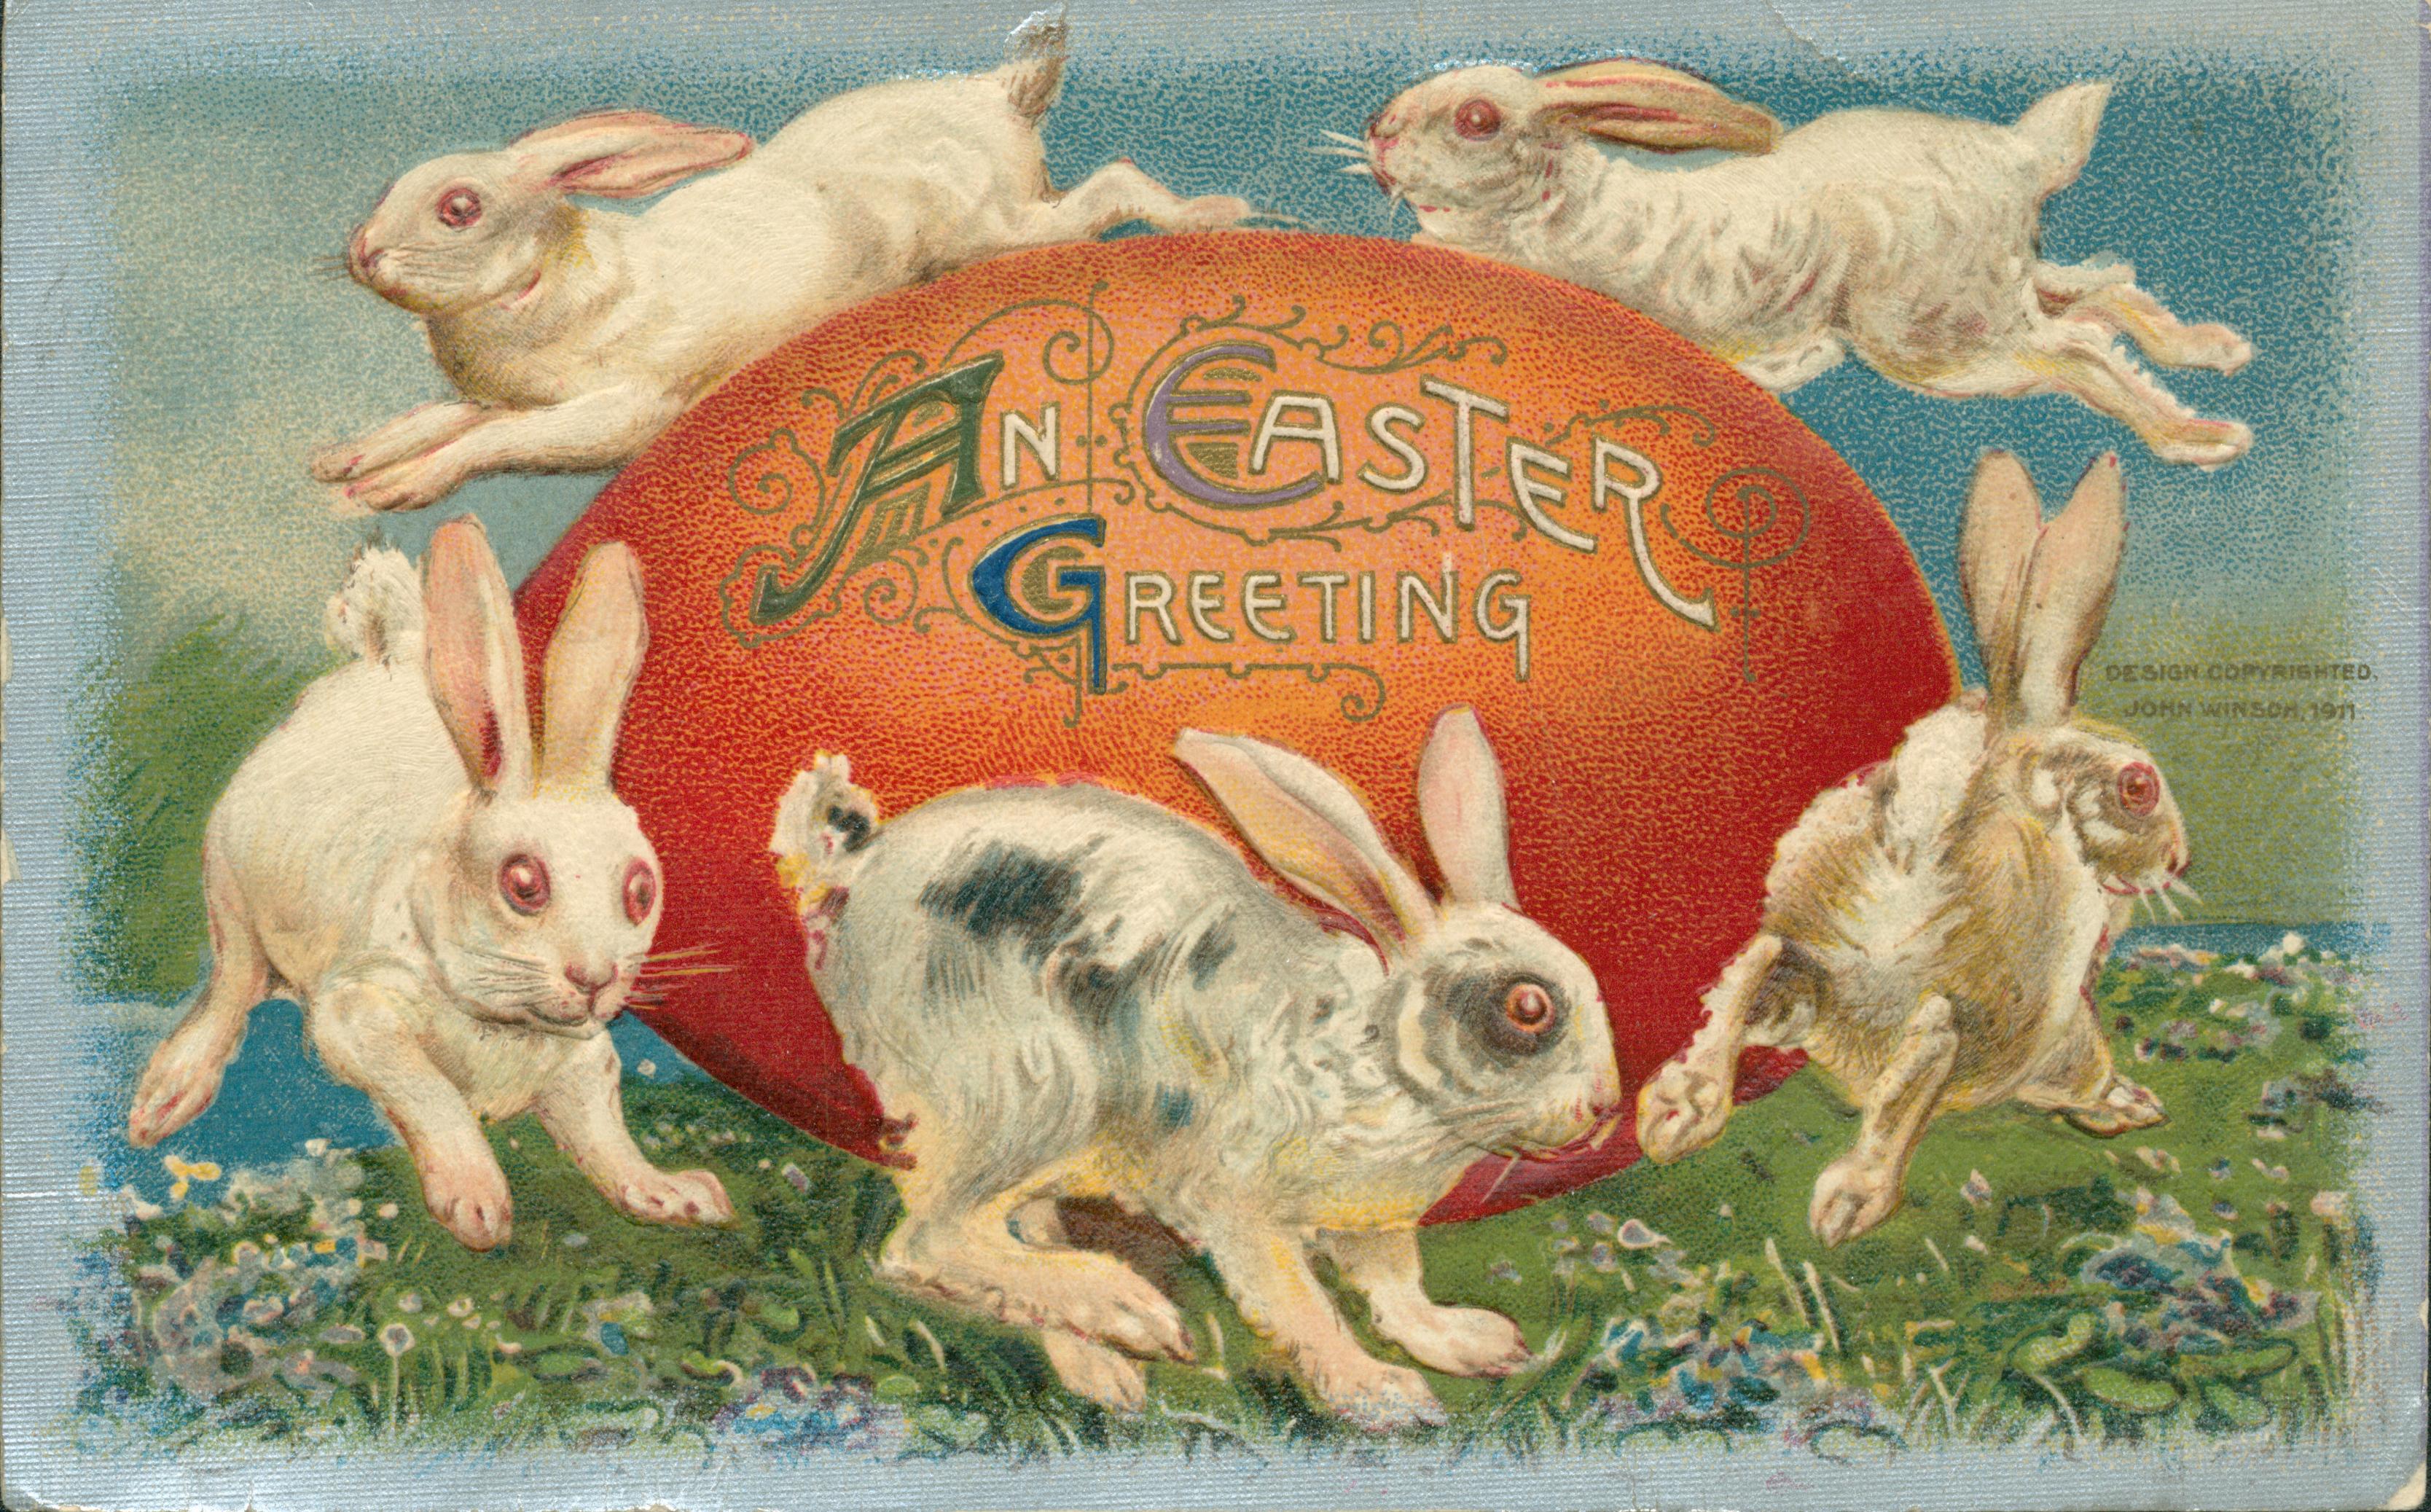 Five rabbits hopping around a large red egg.